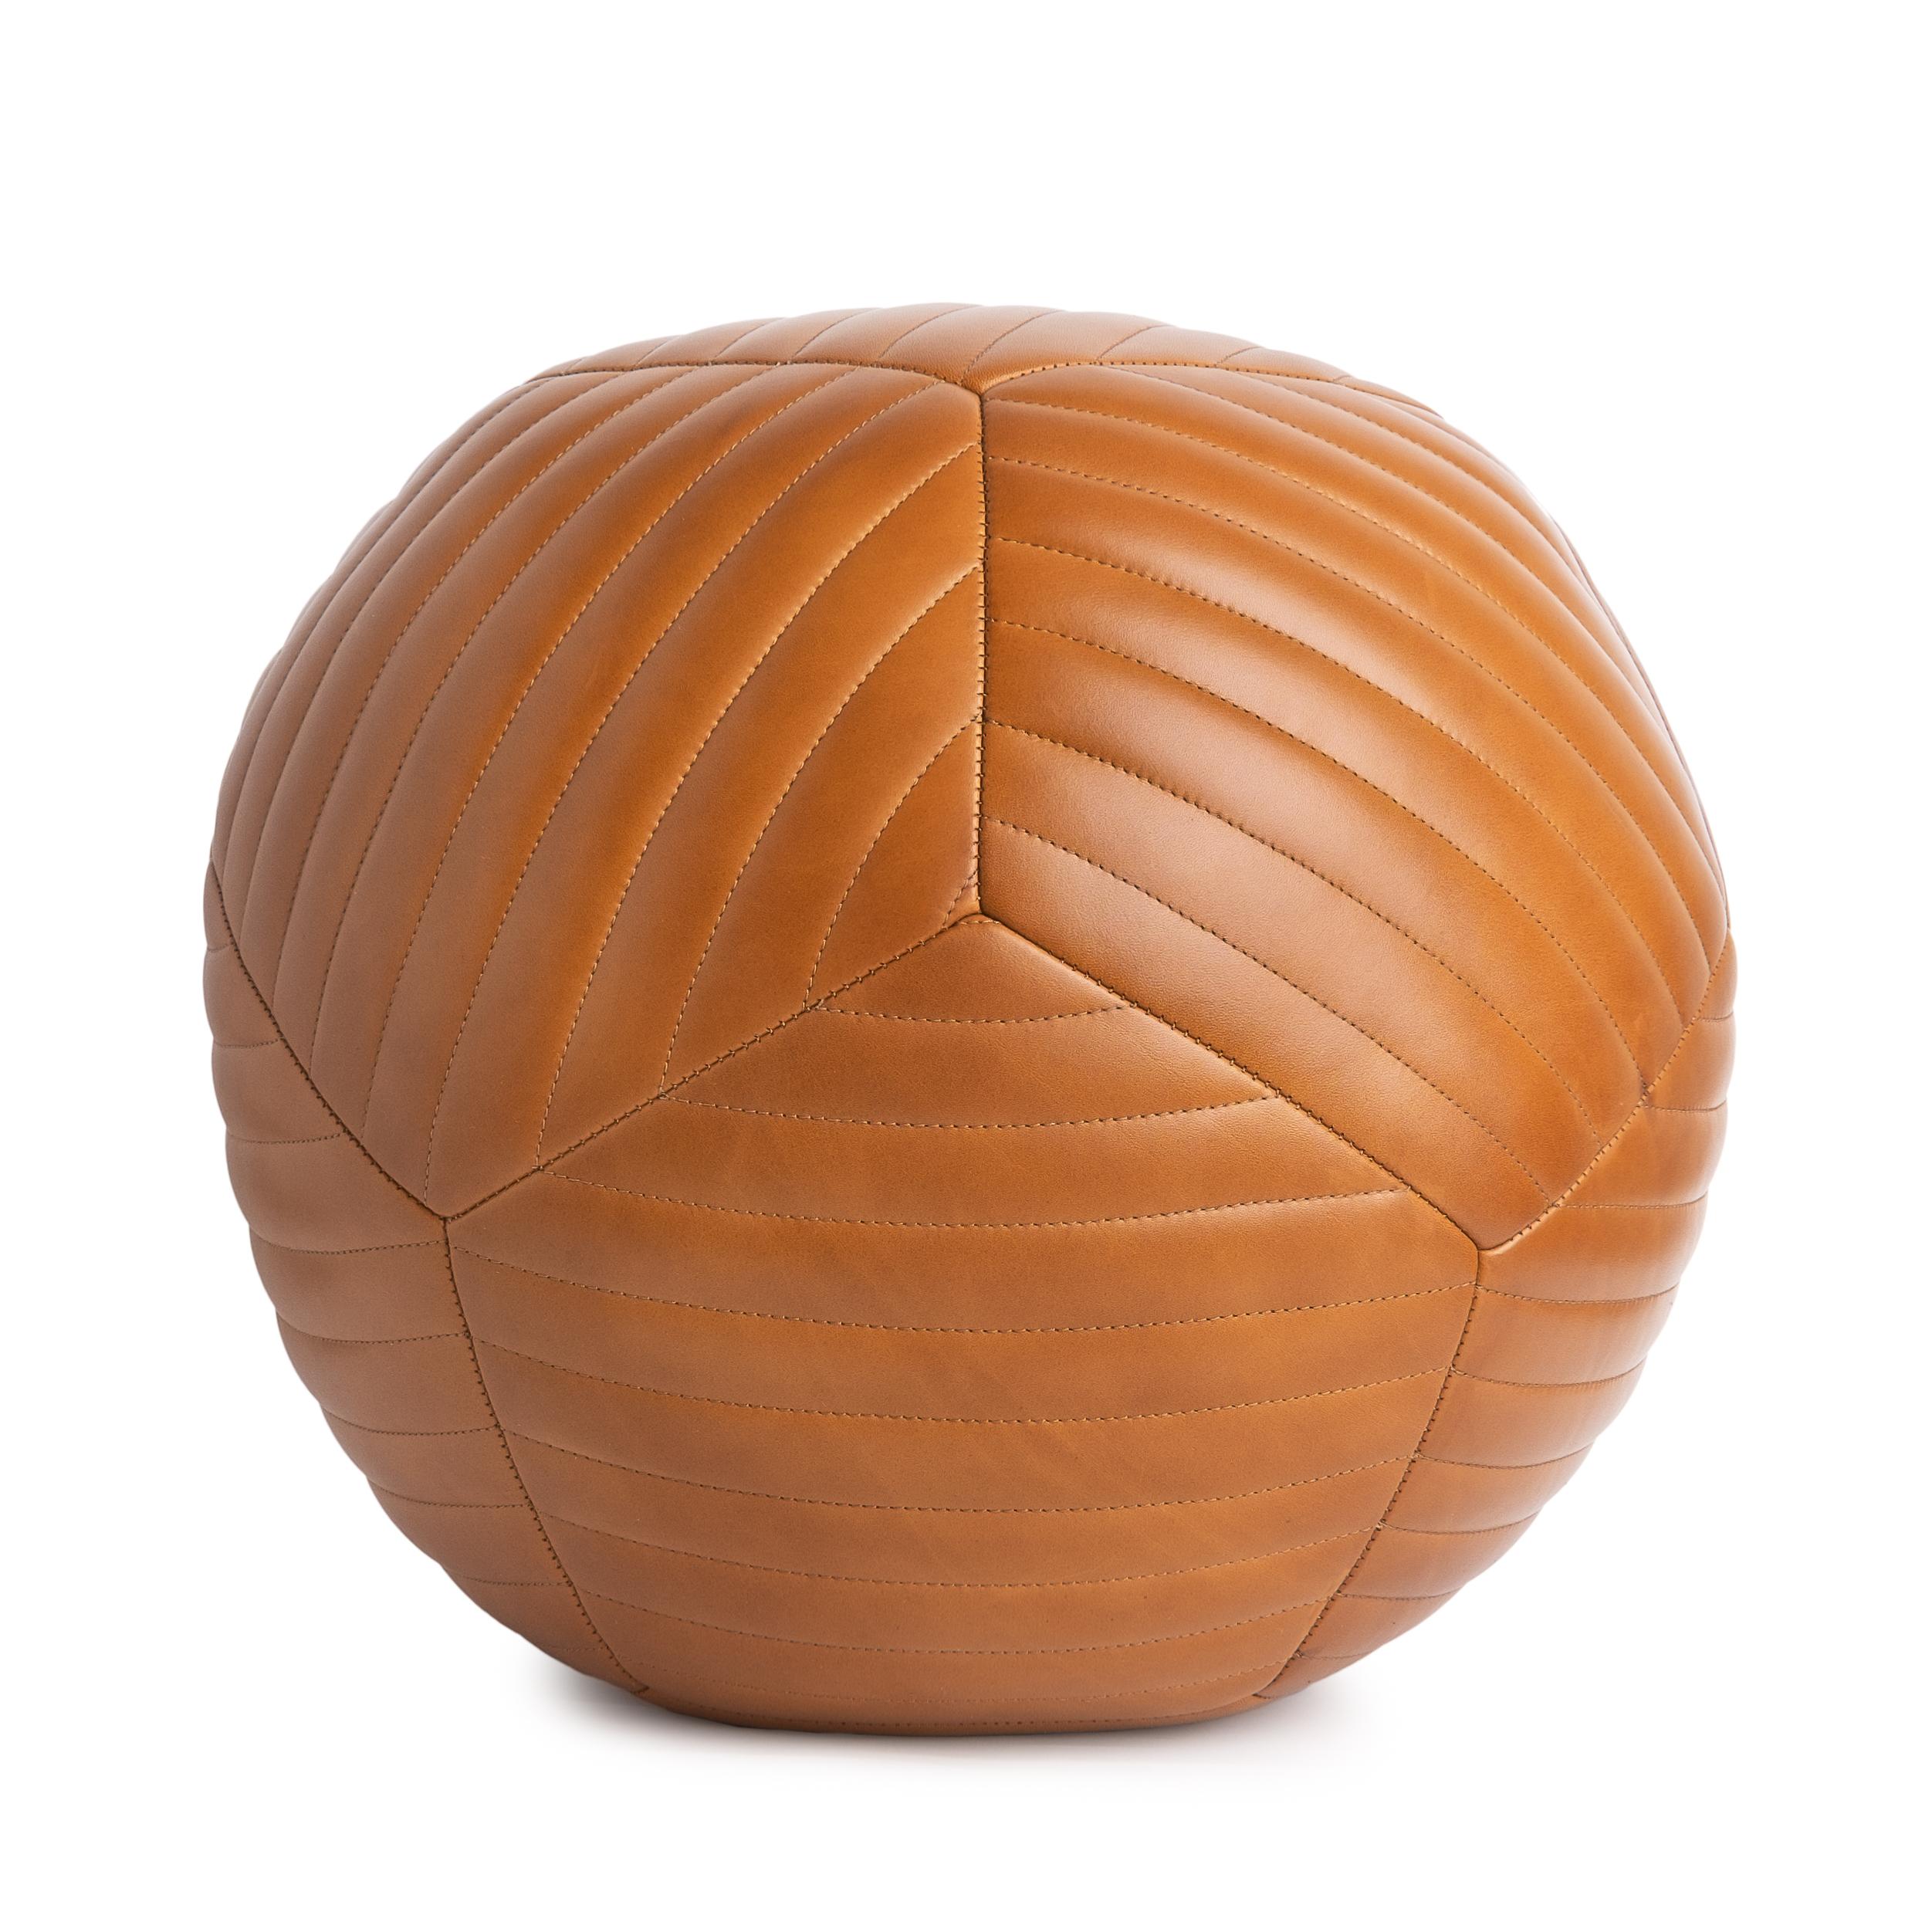 Featured with banded detailing, the banded ottoman is inspired by fundamental geometry. These structured and supportive round ball ottomans are designed to function as a traditional leg rest, add a twist to secondary living room seating, or as